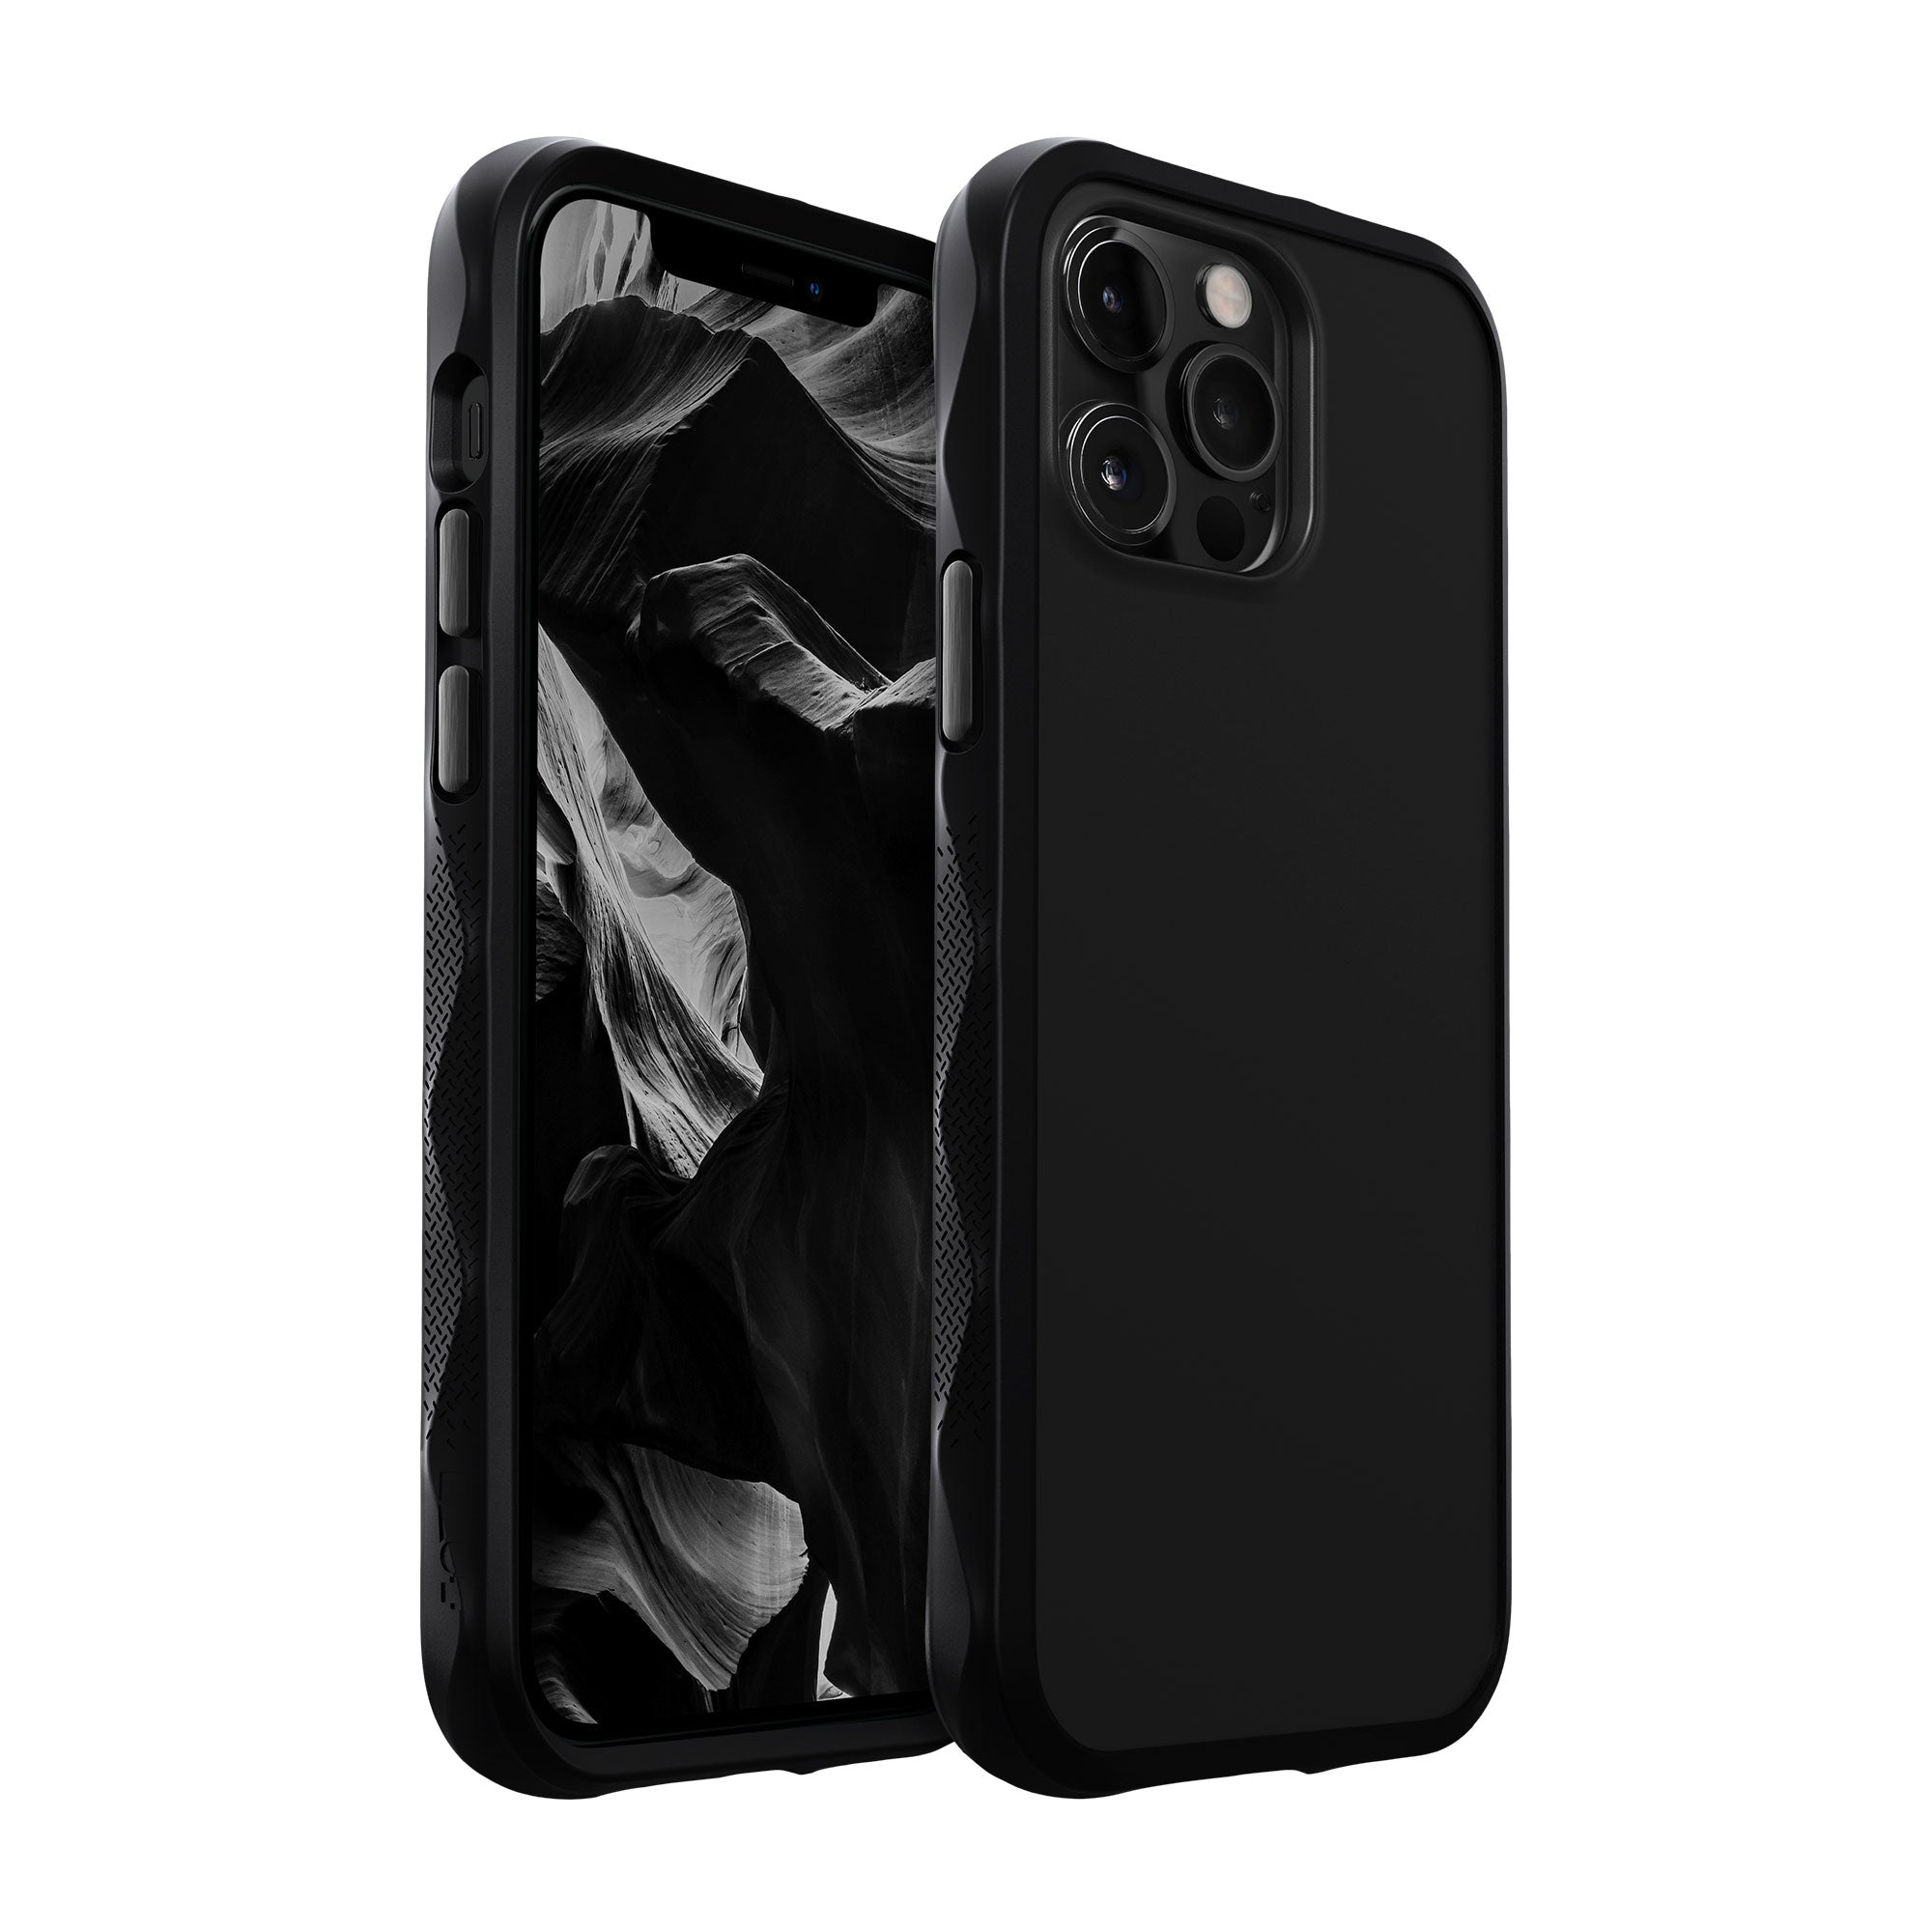 CRYSTAL MATTER (IMPKT) 2.0 case for iPhone 12 series